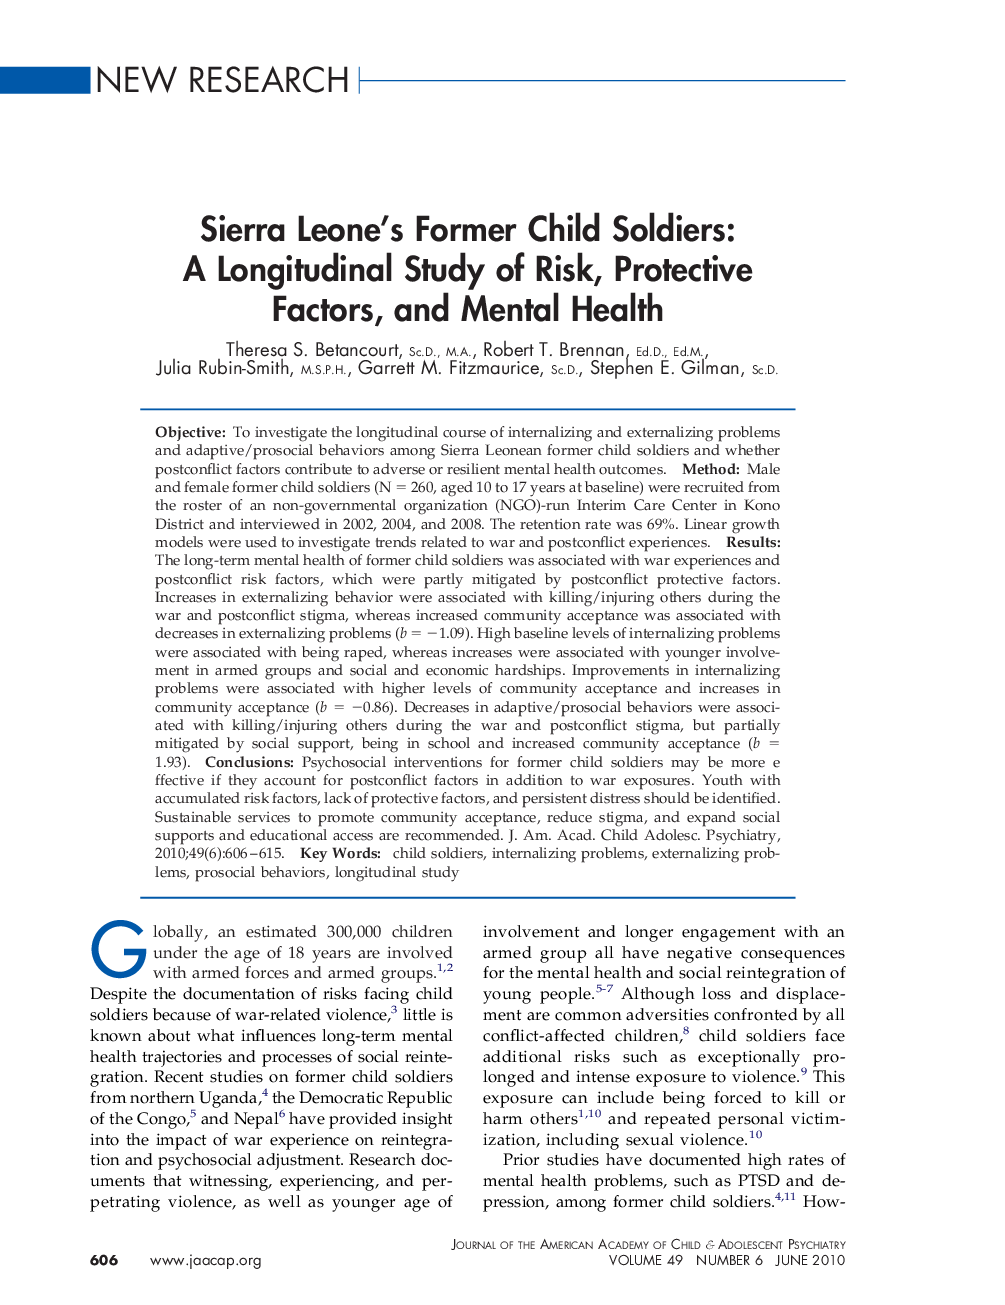 Sierra Leone's Former Child Soldiers: A Longitudinal Study of Risk, Protective Factors, and Mental Health 